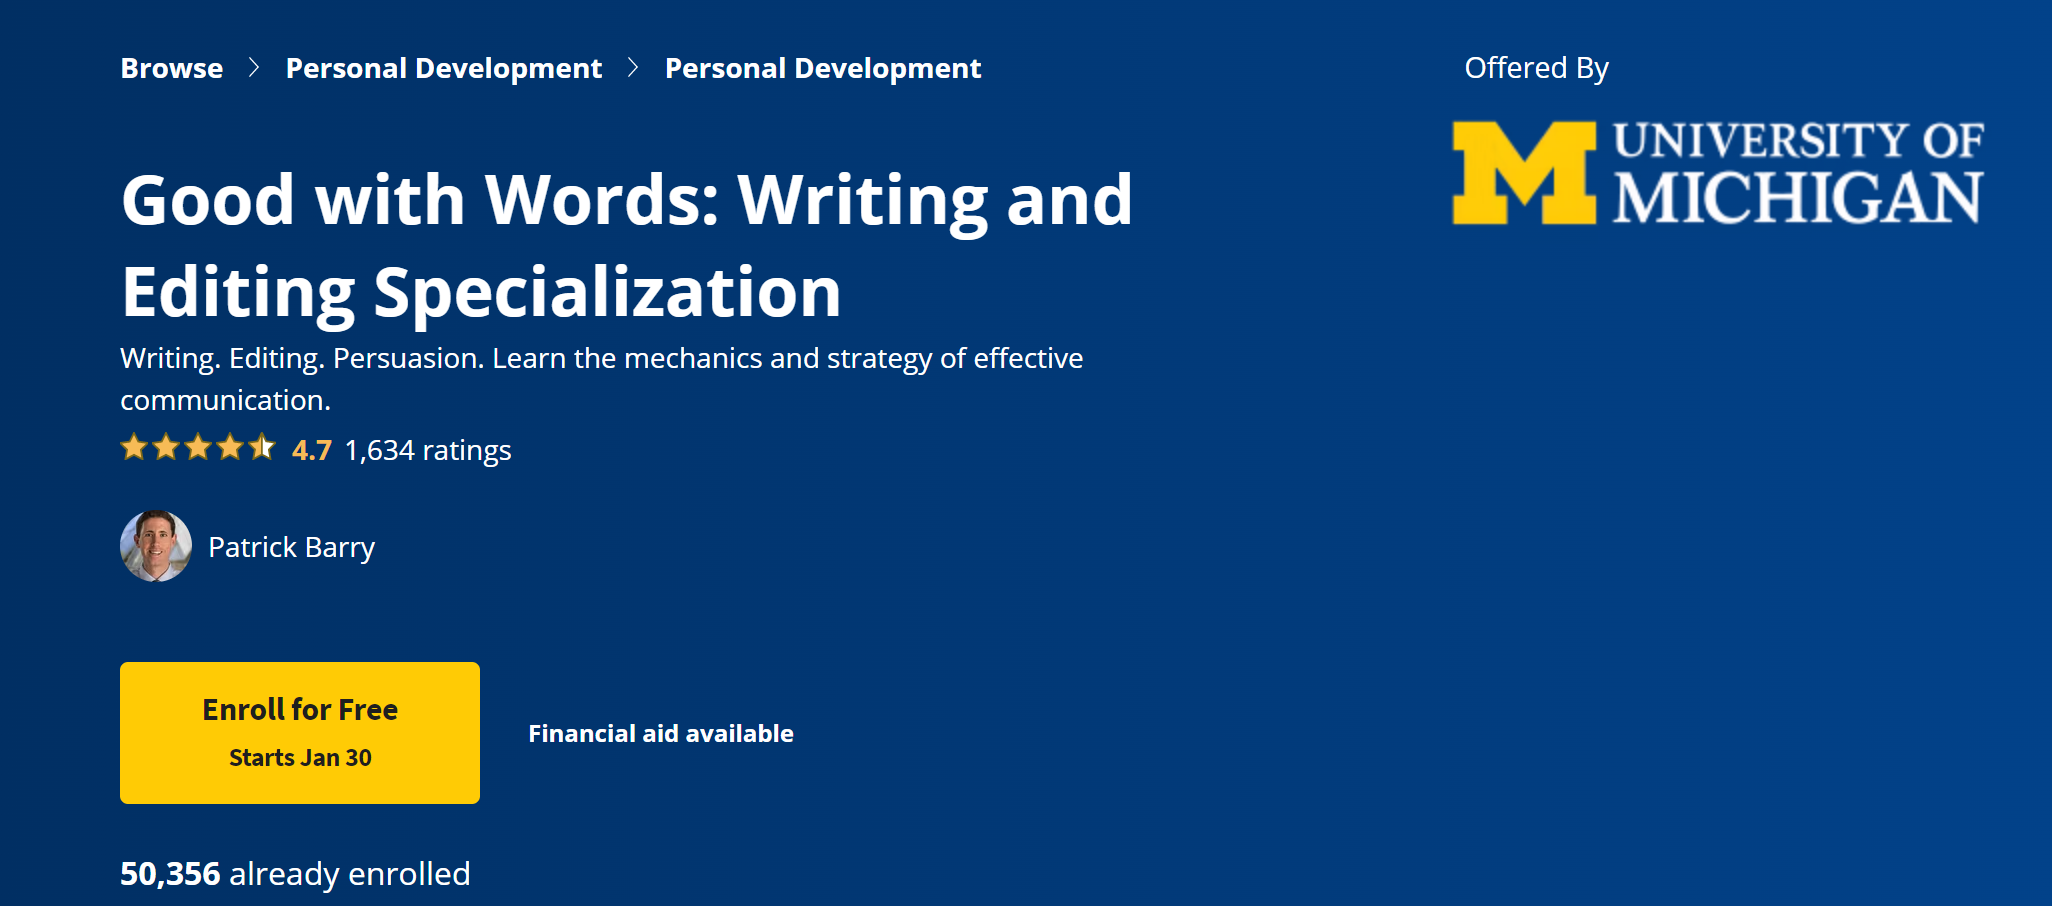 Good with Words - Writing & Editing Specialization